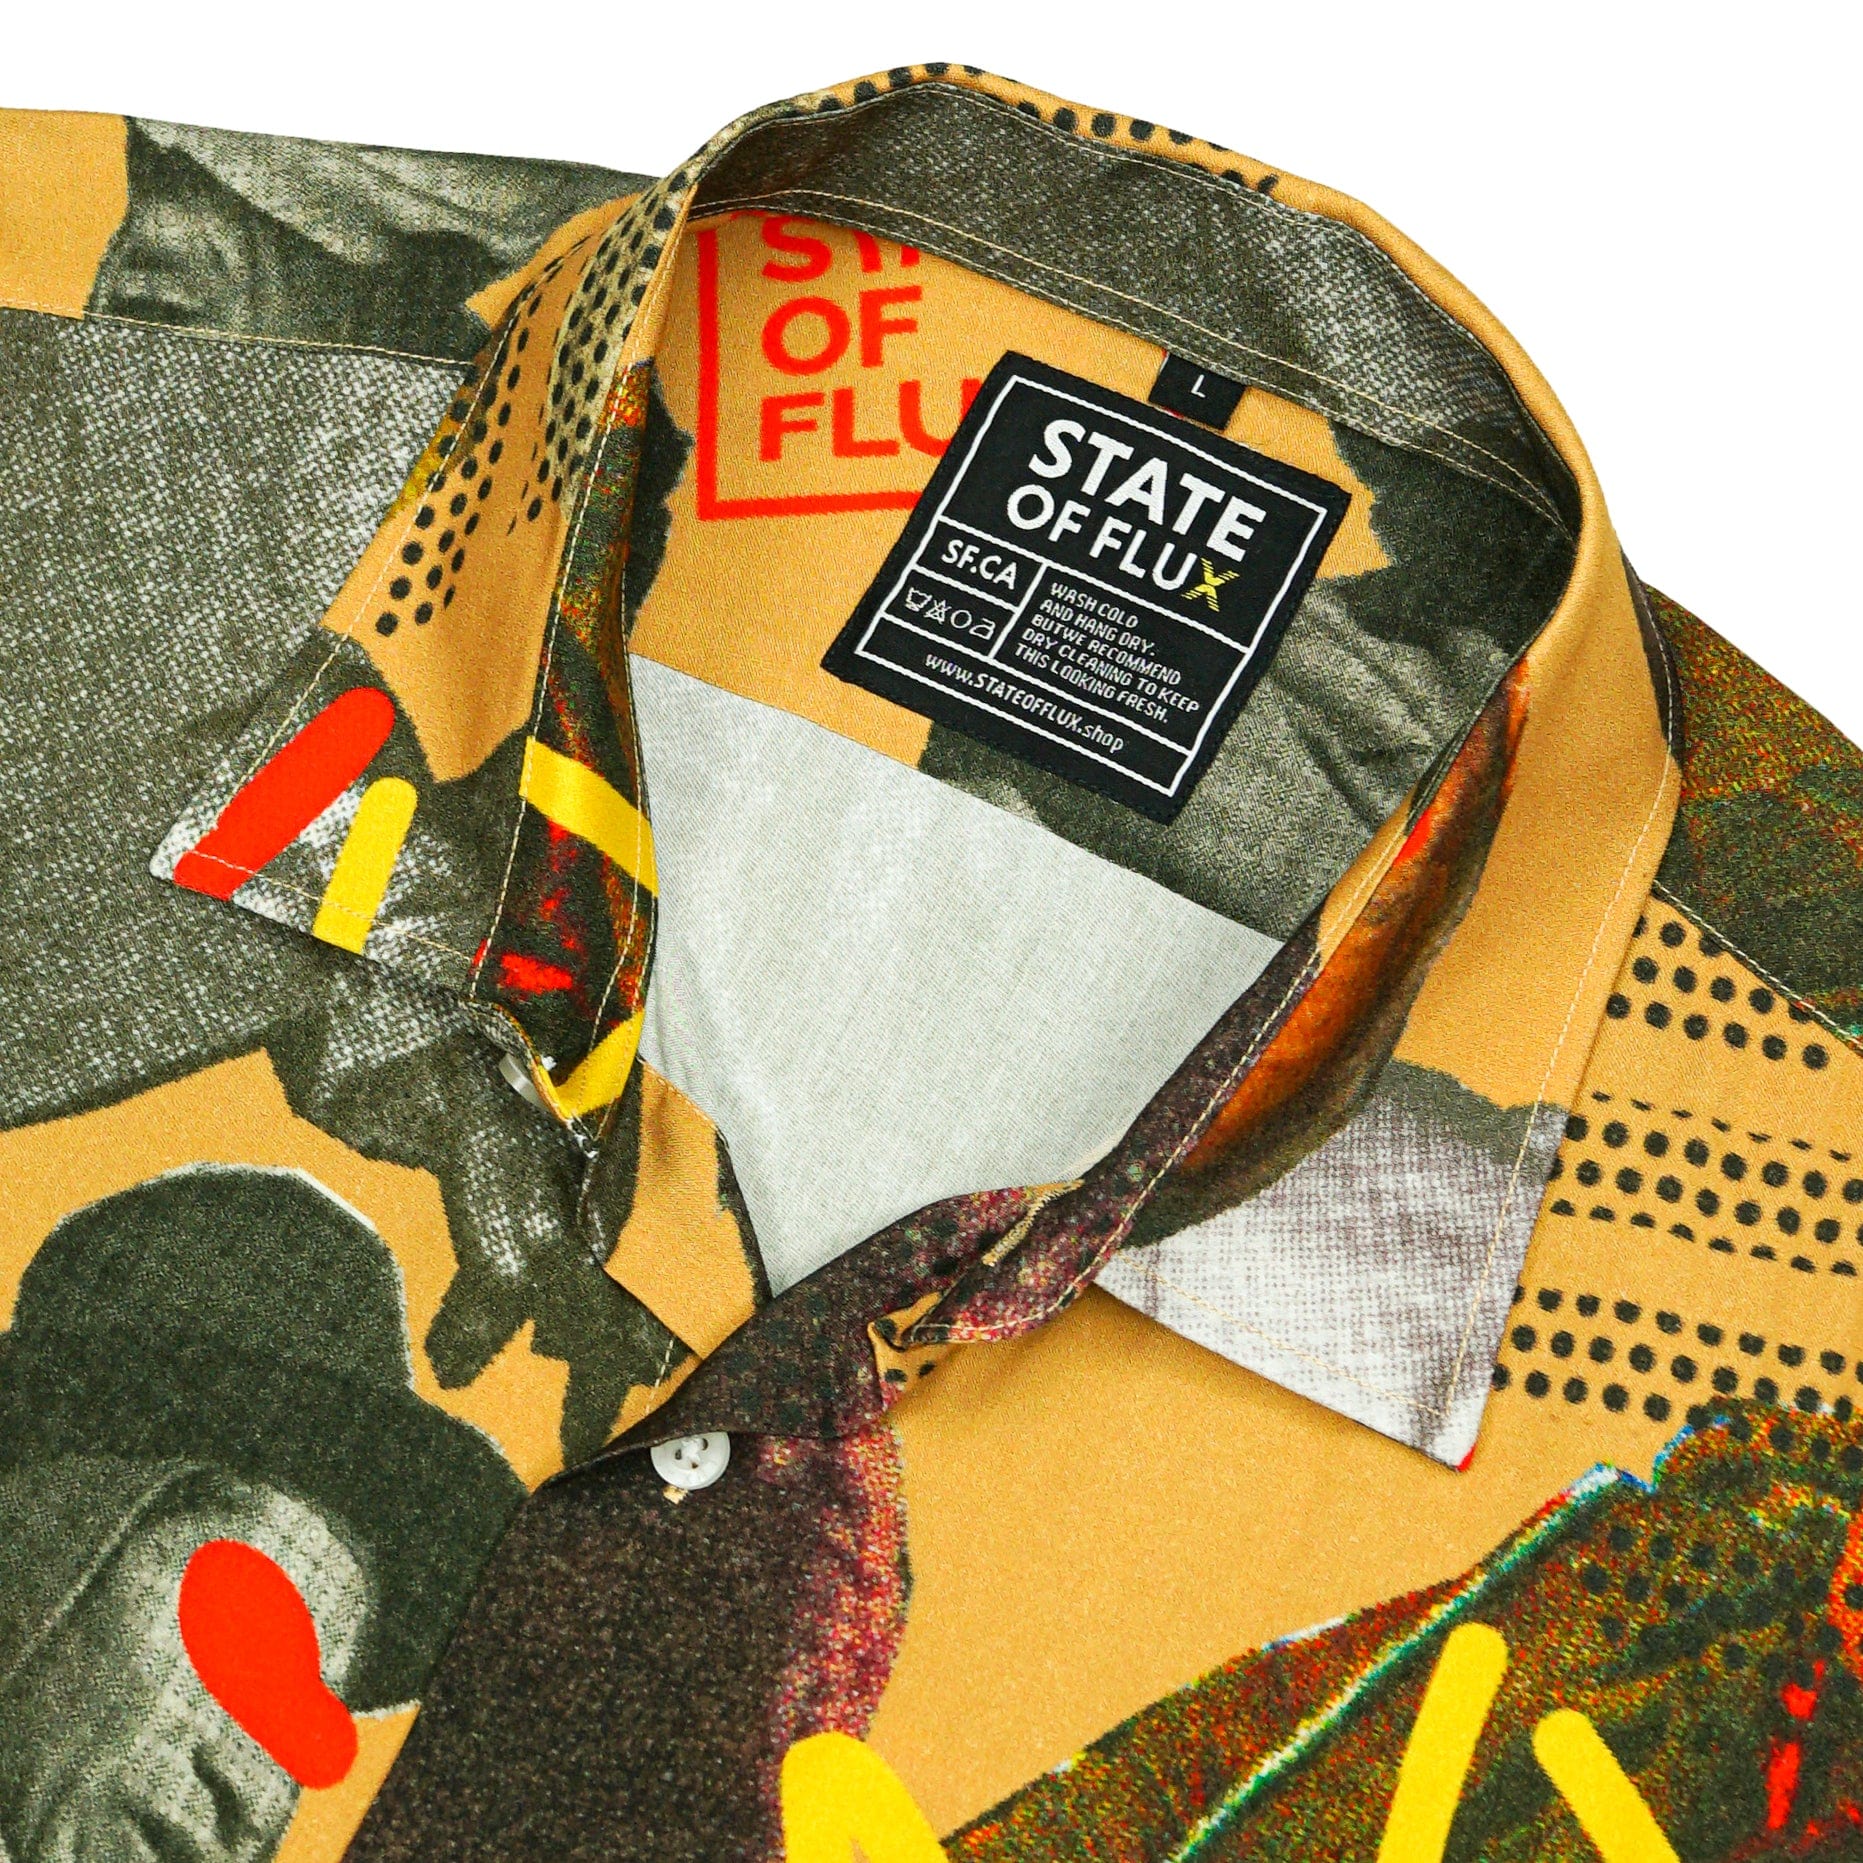 Incognito Short-sleeve Button-up in honey mustard - State Of Flux - State Of Flux